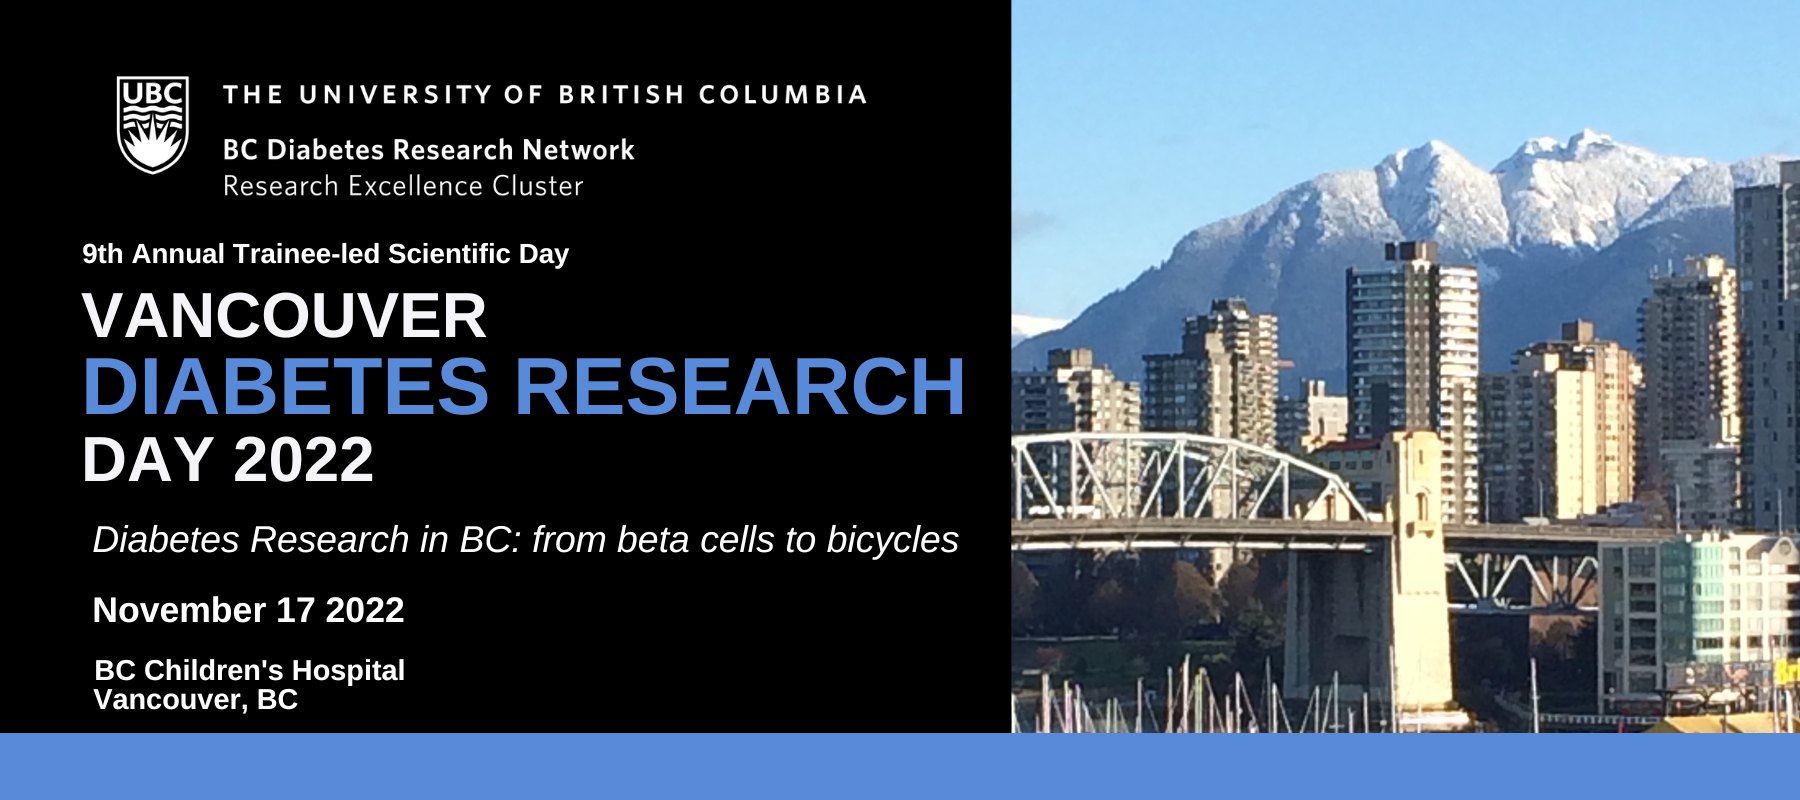 Vancouver Diabetes Research Day 2022